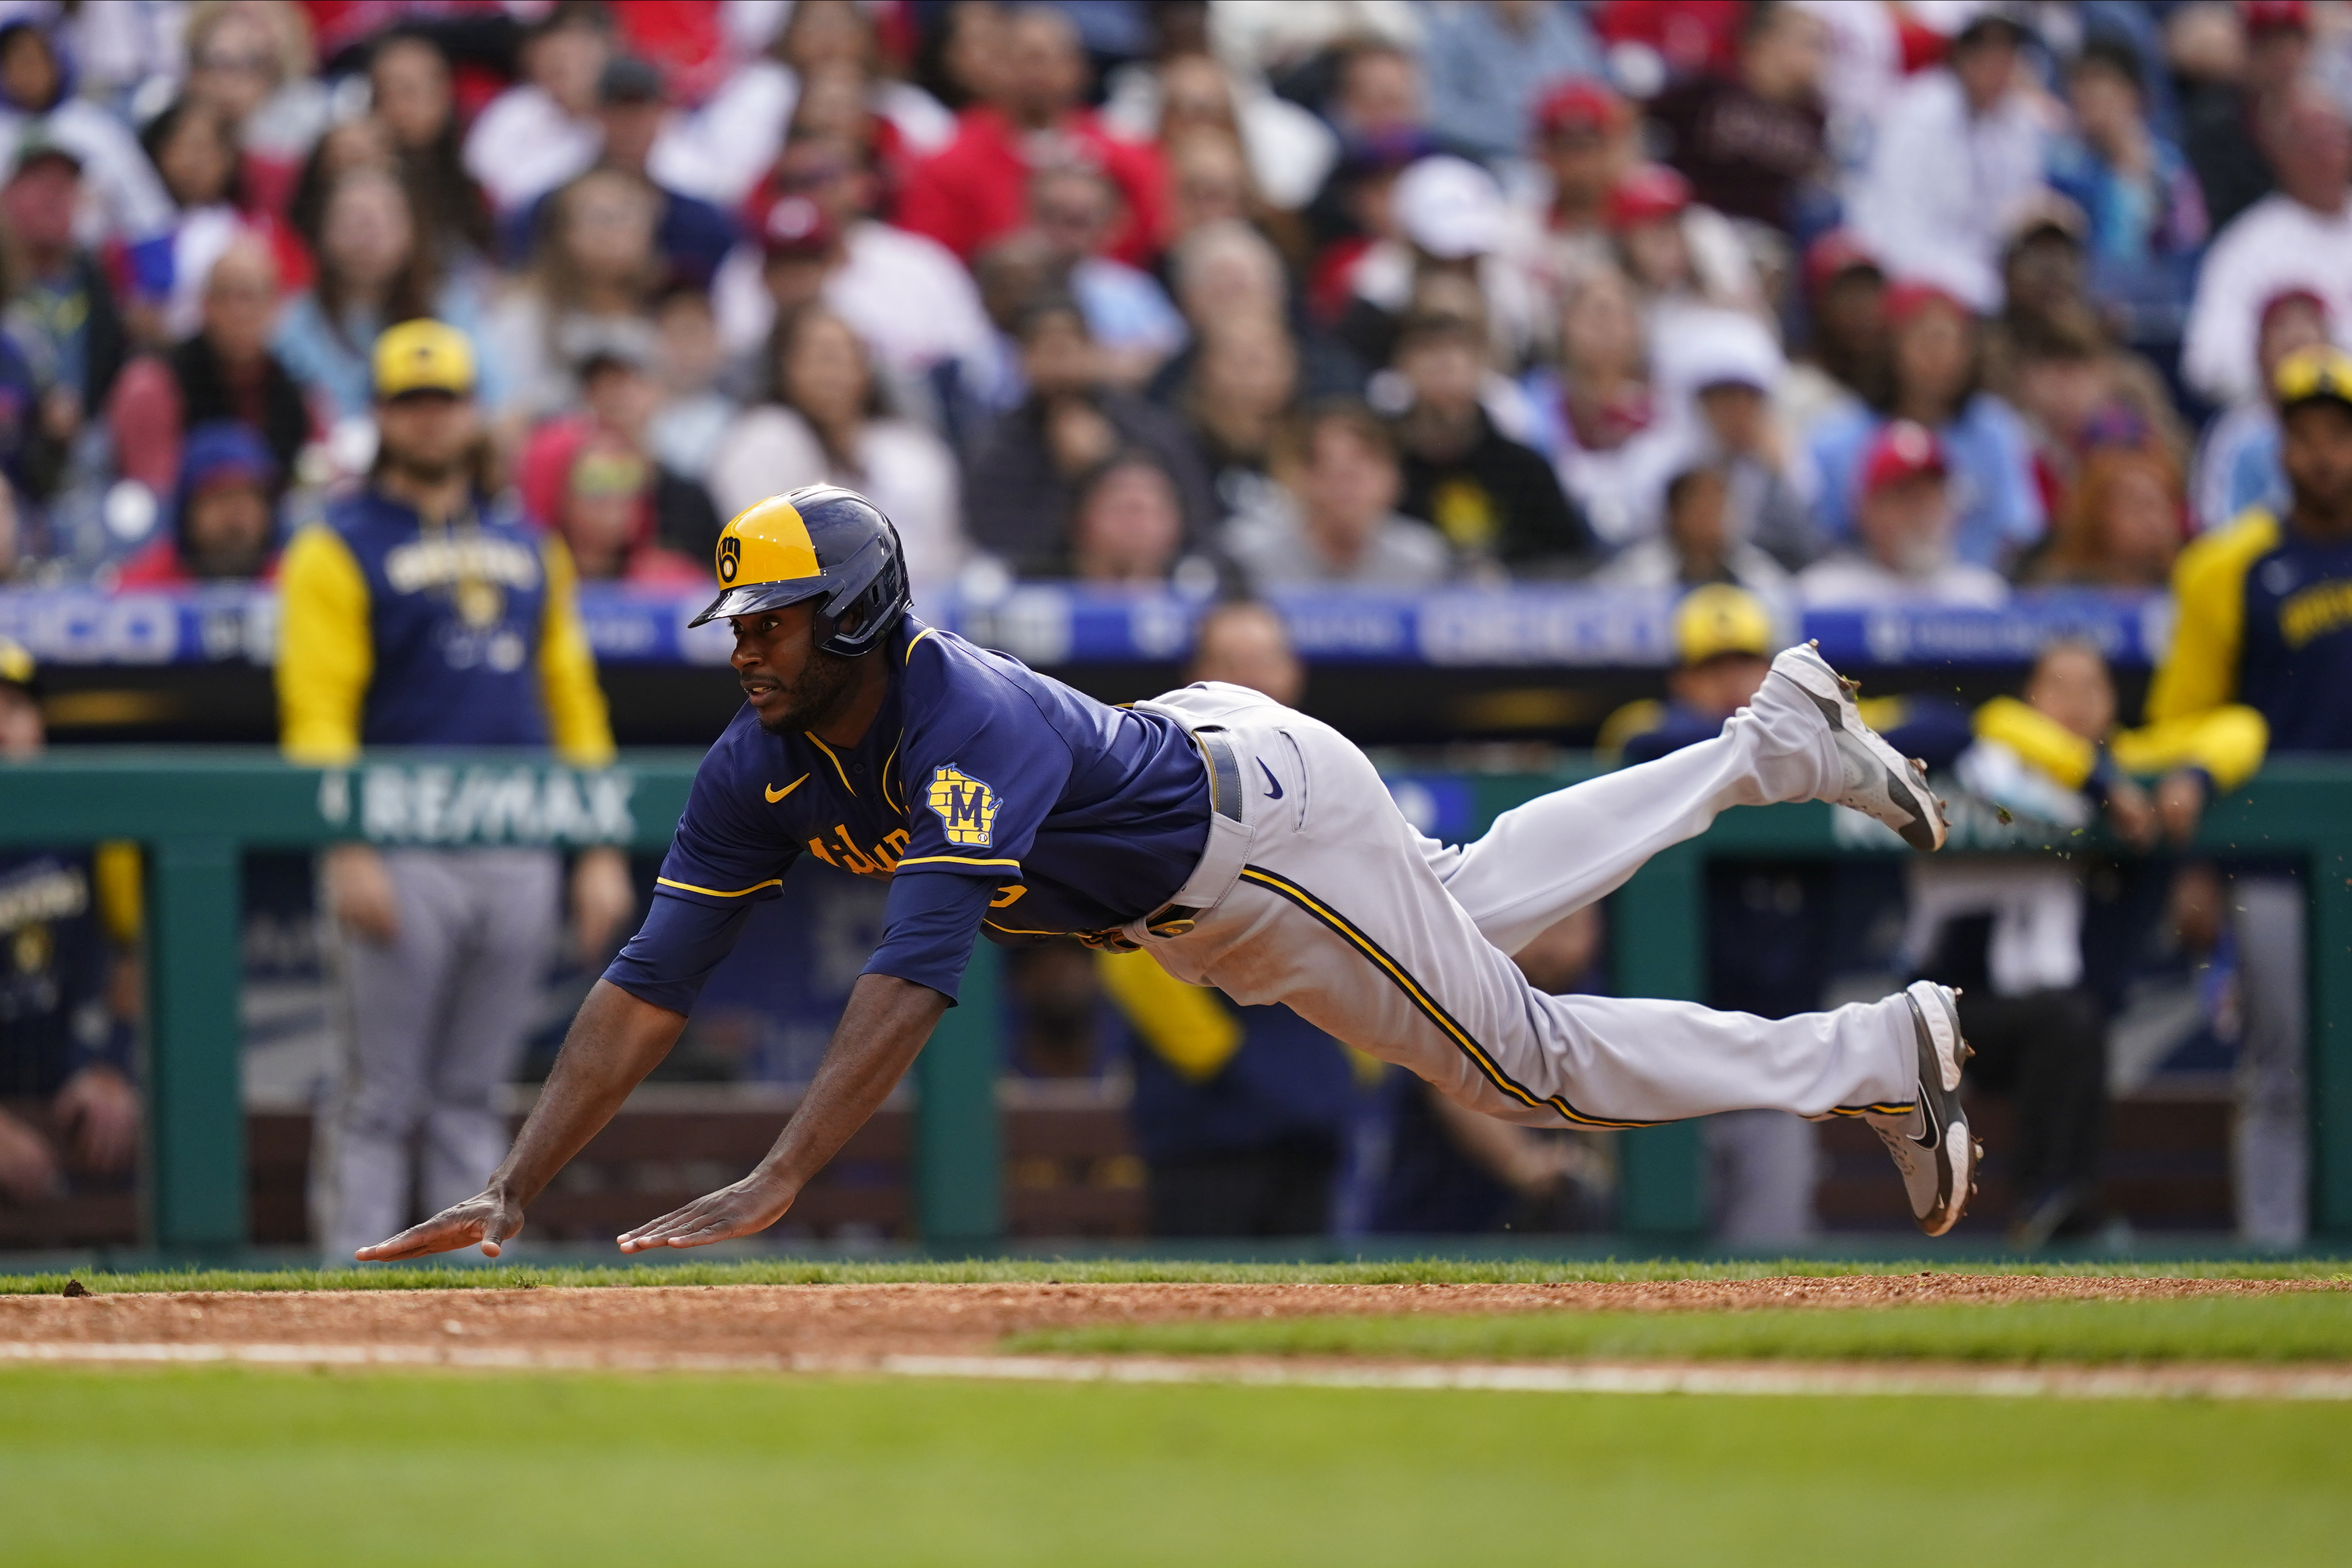 Willy Adames' steal of home highlights Brewers' victory